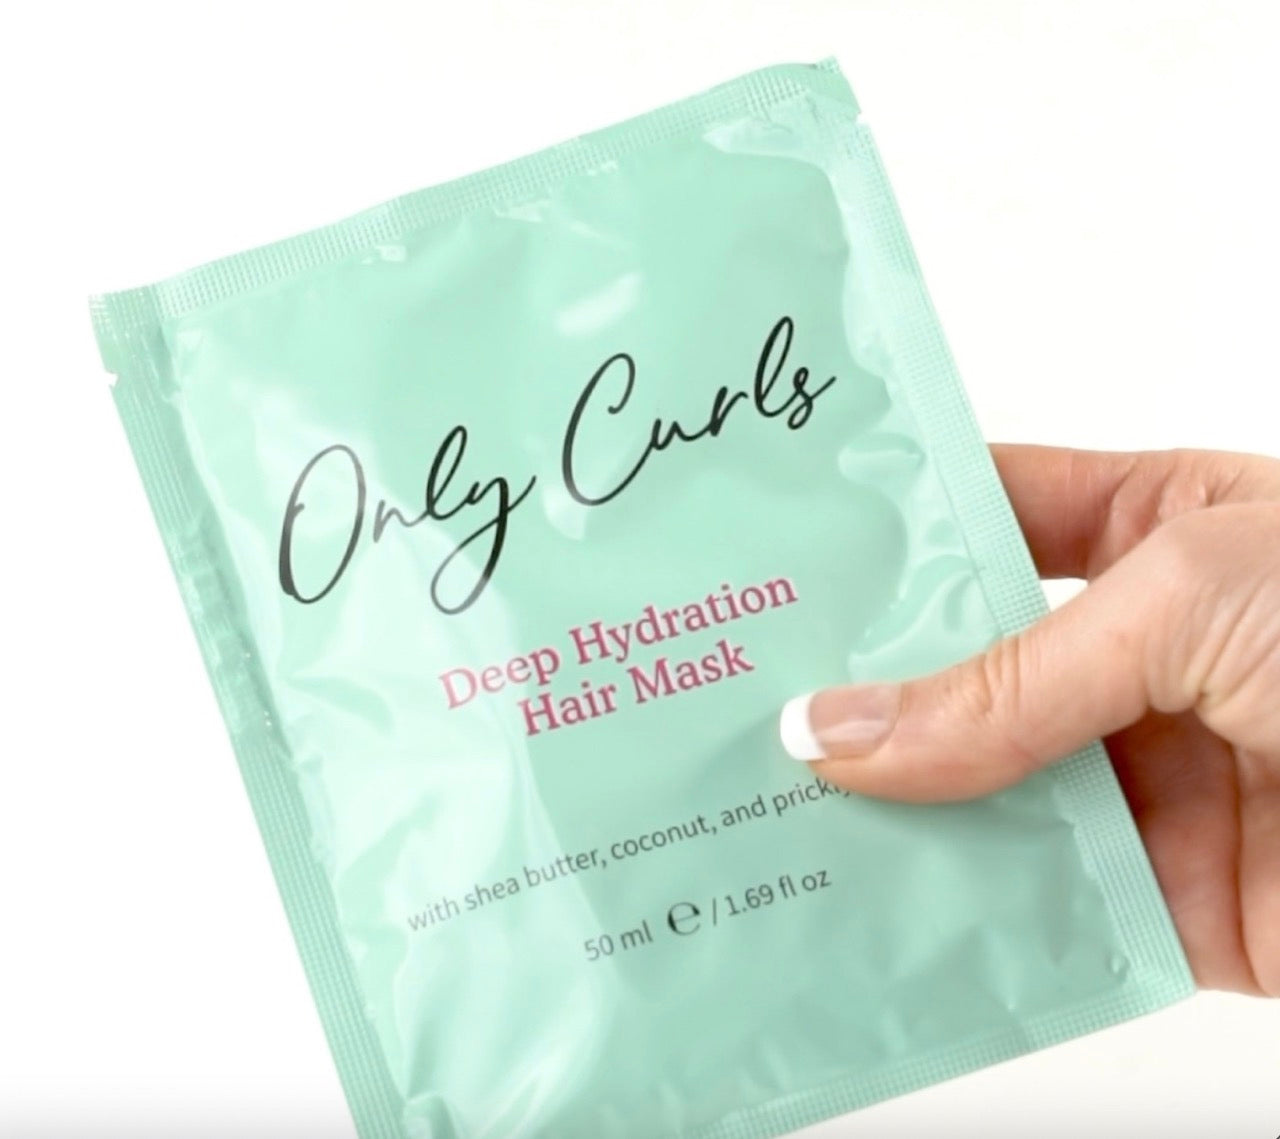 Only Curls Deep Hydration Hair Mask - Sample Sachet - Only Curls